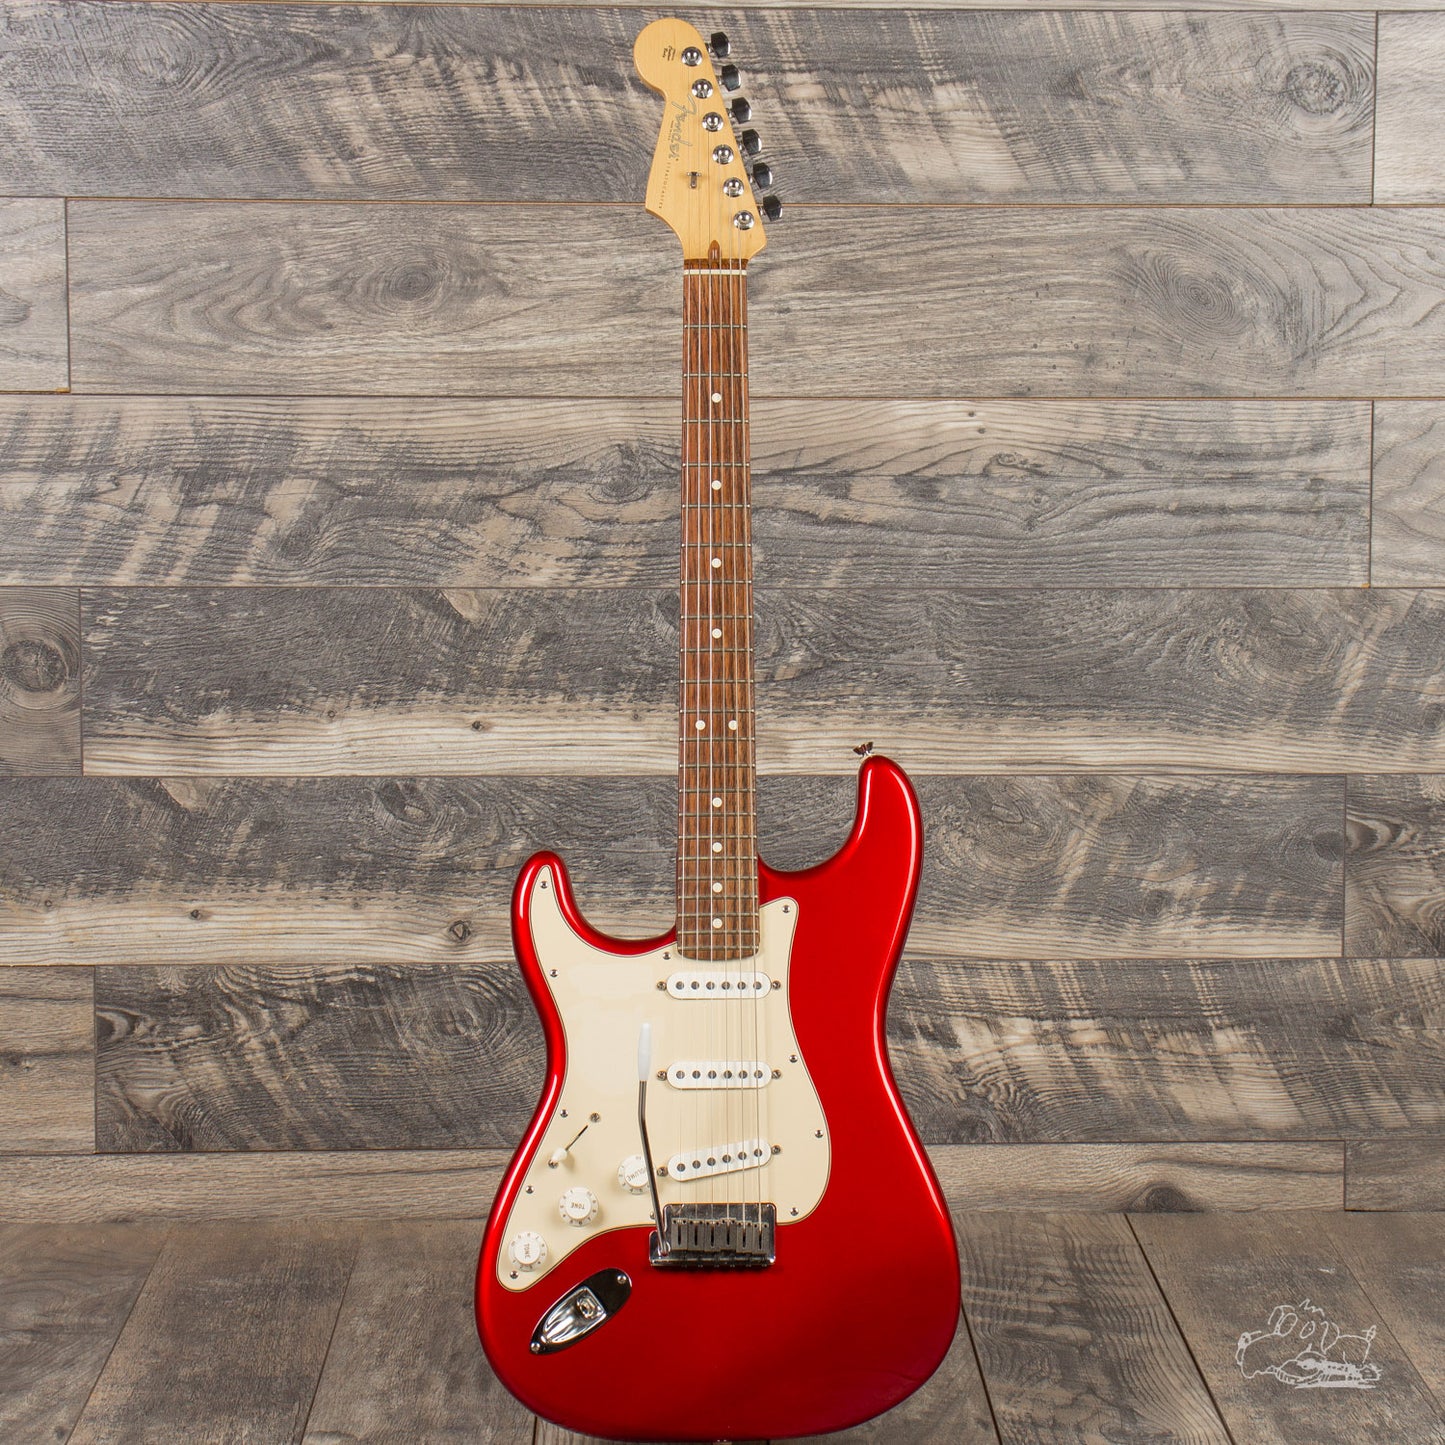 2004 Fender American Standard Stratocaster, Lefty, Candy Apple Red